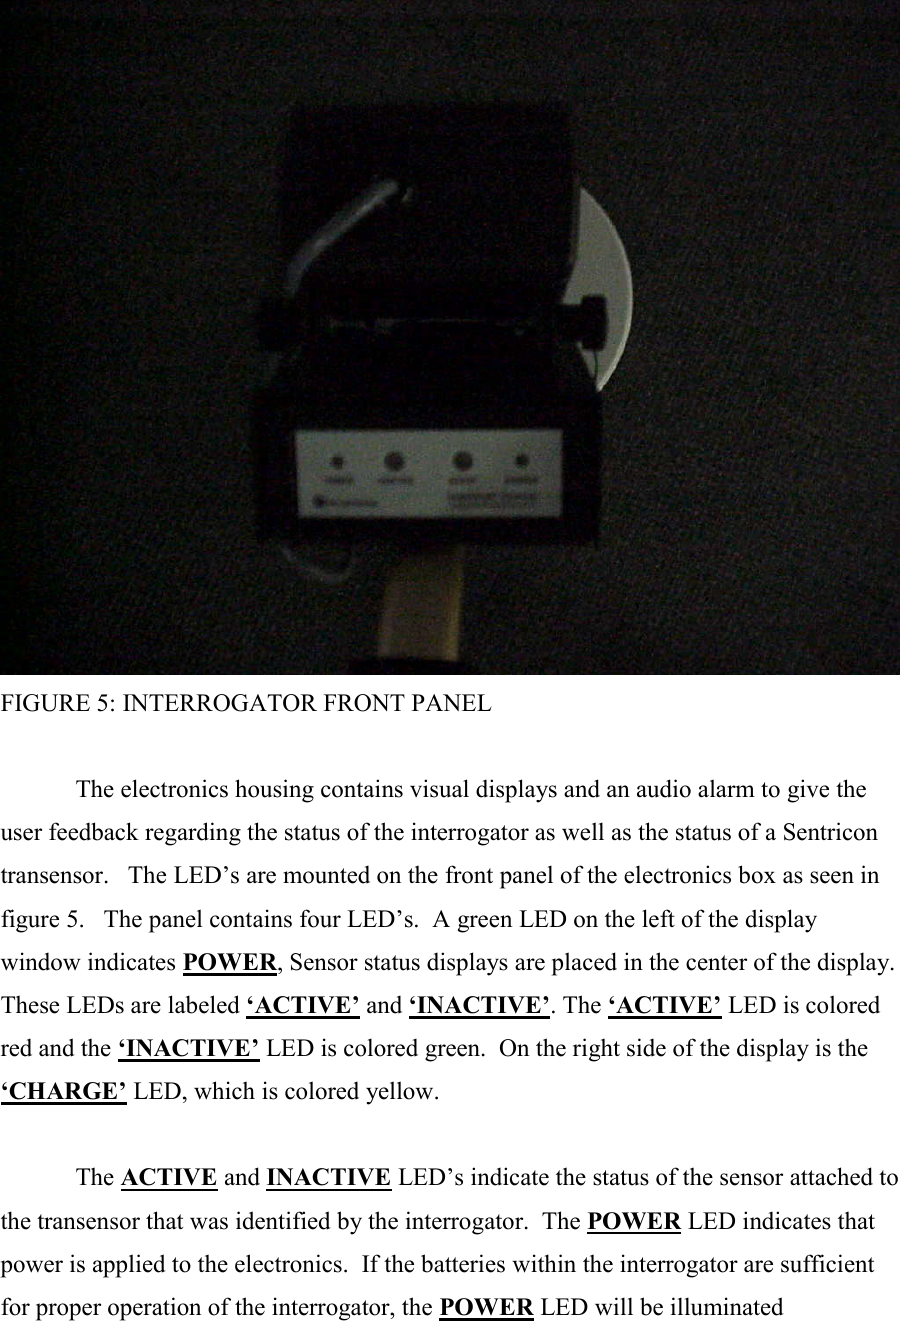  FIGURE 5: INTERROGATOR FRONT PANEL  The electronics housing contains visual displays and an audio alarm to give the user feedback regarding the status of the interrogator as well as the status of a Sentricon transensor.   The LED’s are mounted on the front panel of the electronics box as seen in figure 5.   The panel contains four LED’s.  A green LED on the left of the display window indicates POWER, Sensor status displays are placed in the center of the display.  These LEDs are labeled ‘ACTIVE’ and ‘INACTIVE’. The ‘ACTIVE’ LED is colored red and the ‘INACTIVE’ LED is colored green.  On the right side of the display is the ‘CHARGE’ LED, which is colored yellow.    The ACTIVE and INACTIVE LED’s indicate the status of the sensor attached to the transensor that was identified by the interrogator.  The POWER LED indicates that power is applied to the electronics.  If the batteries within the interrogator are sufficient for proper operation of the interrogator, the POWER LED will be illuminated 